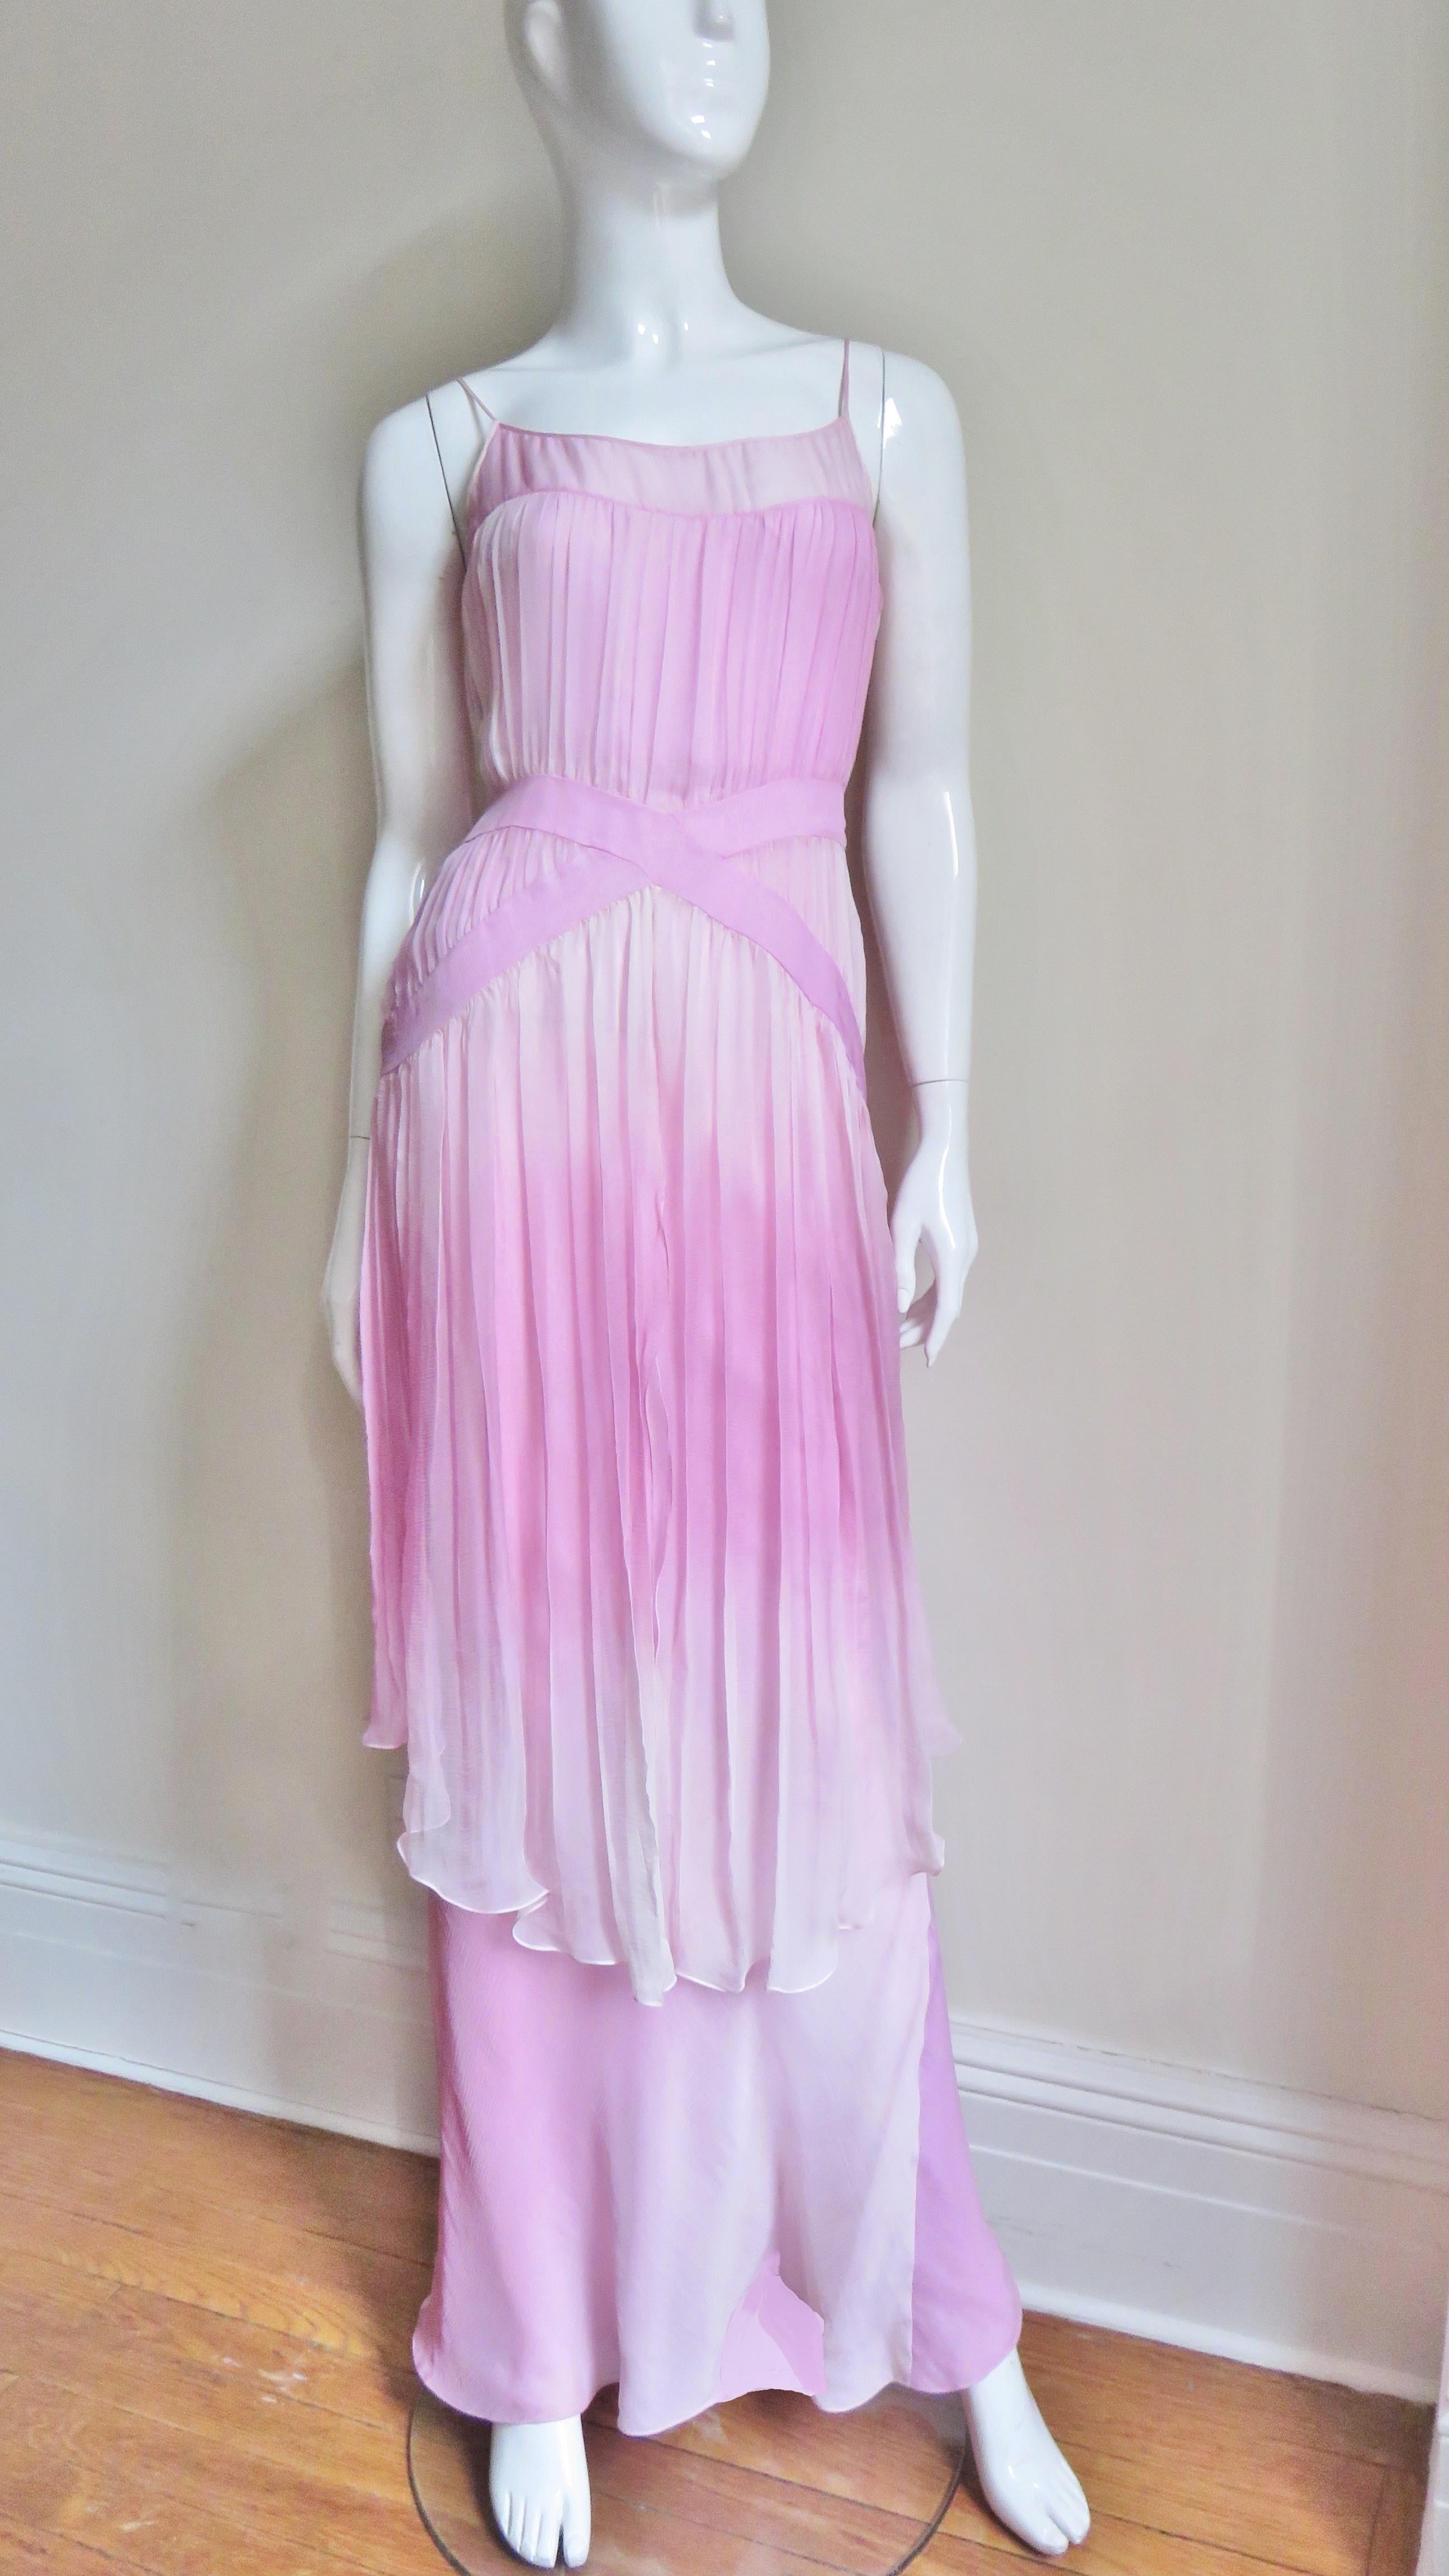 A spectacular John Galliano silk gown in ombre shades of pink.  The bodice has spaghetti straps and gathers onto 2 angled bands crossing at the waist.  It has a 2 tier skirt, the shorter tier is open at the side, front and back is over the floor